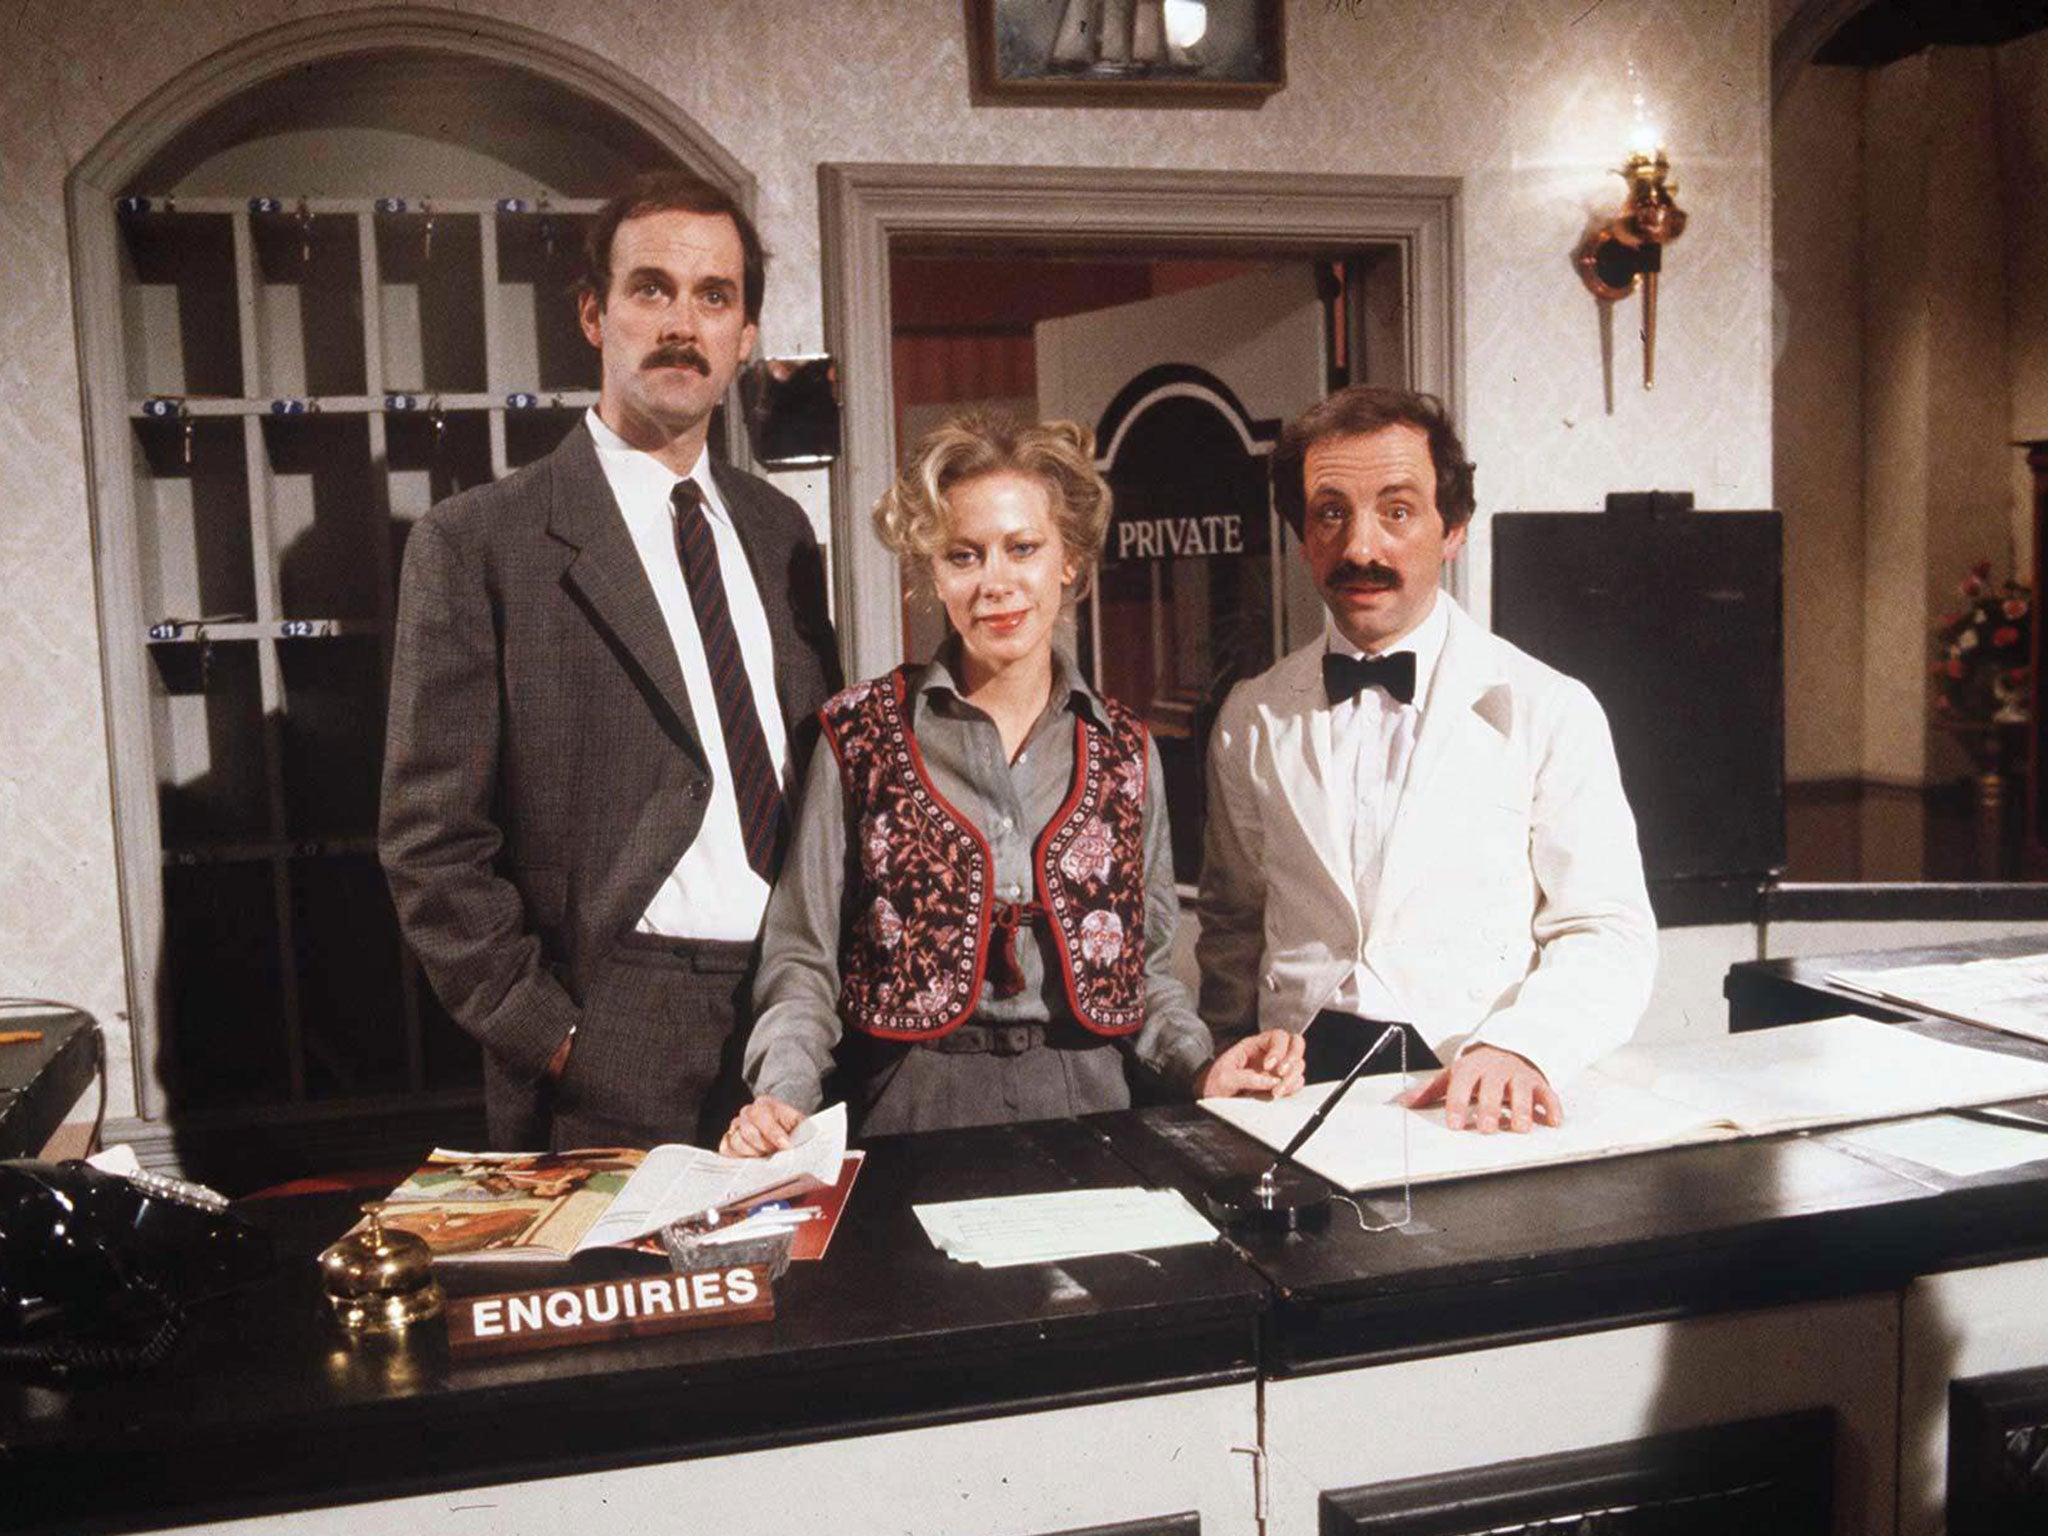 Inventive, inspired, ingenious sarcasm: The cast of Fawlty Towers (Rex)